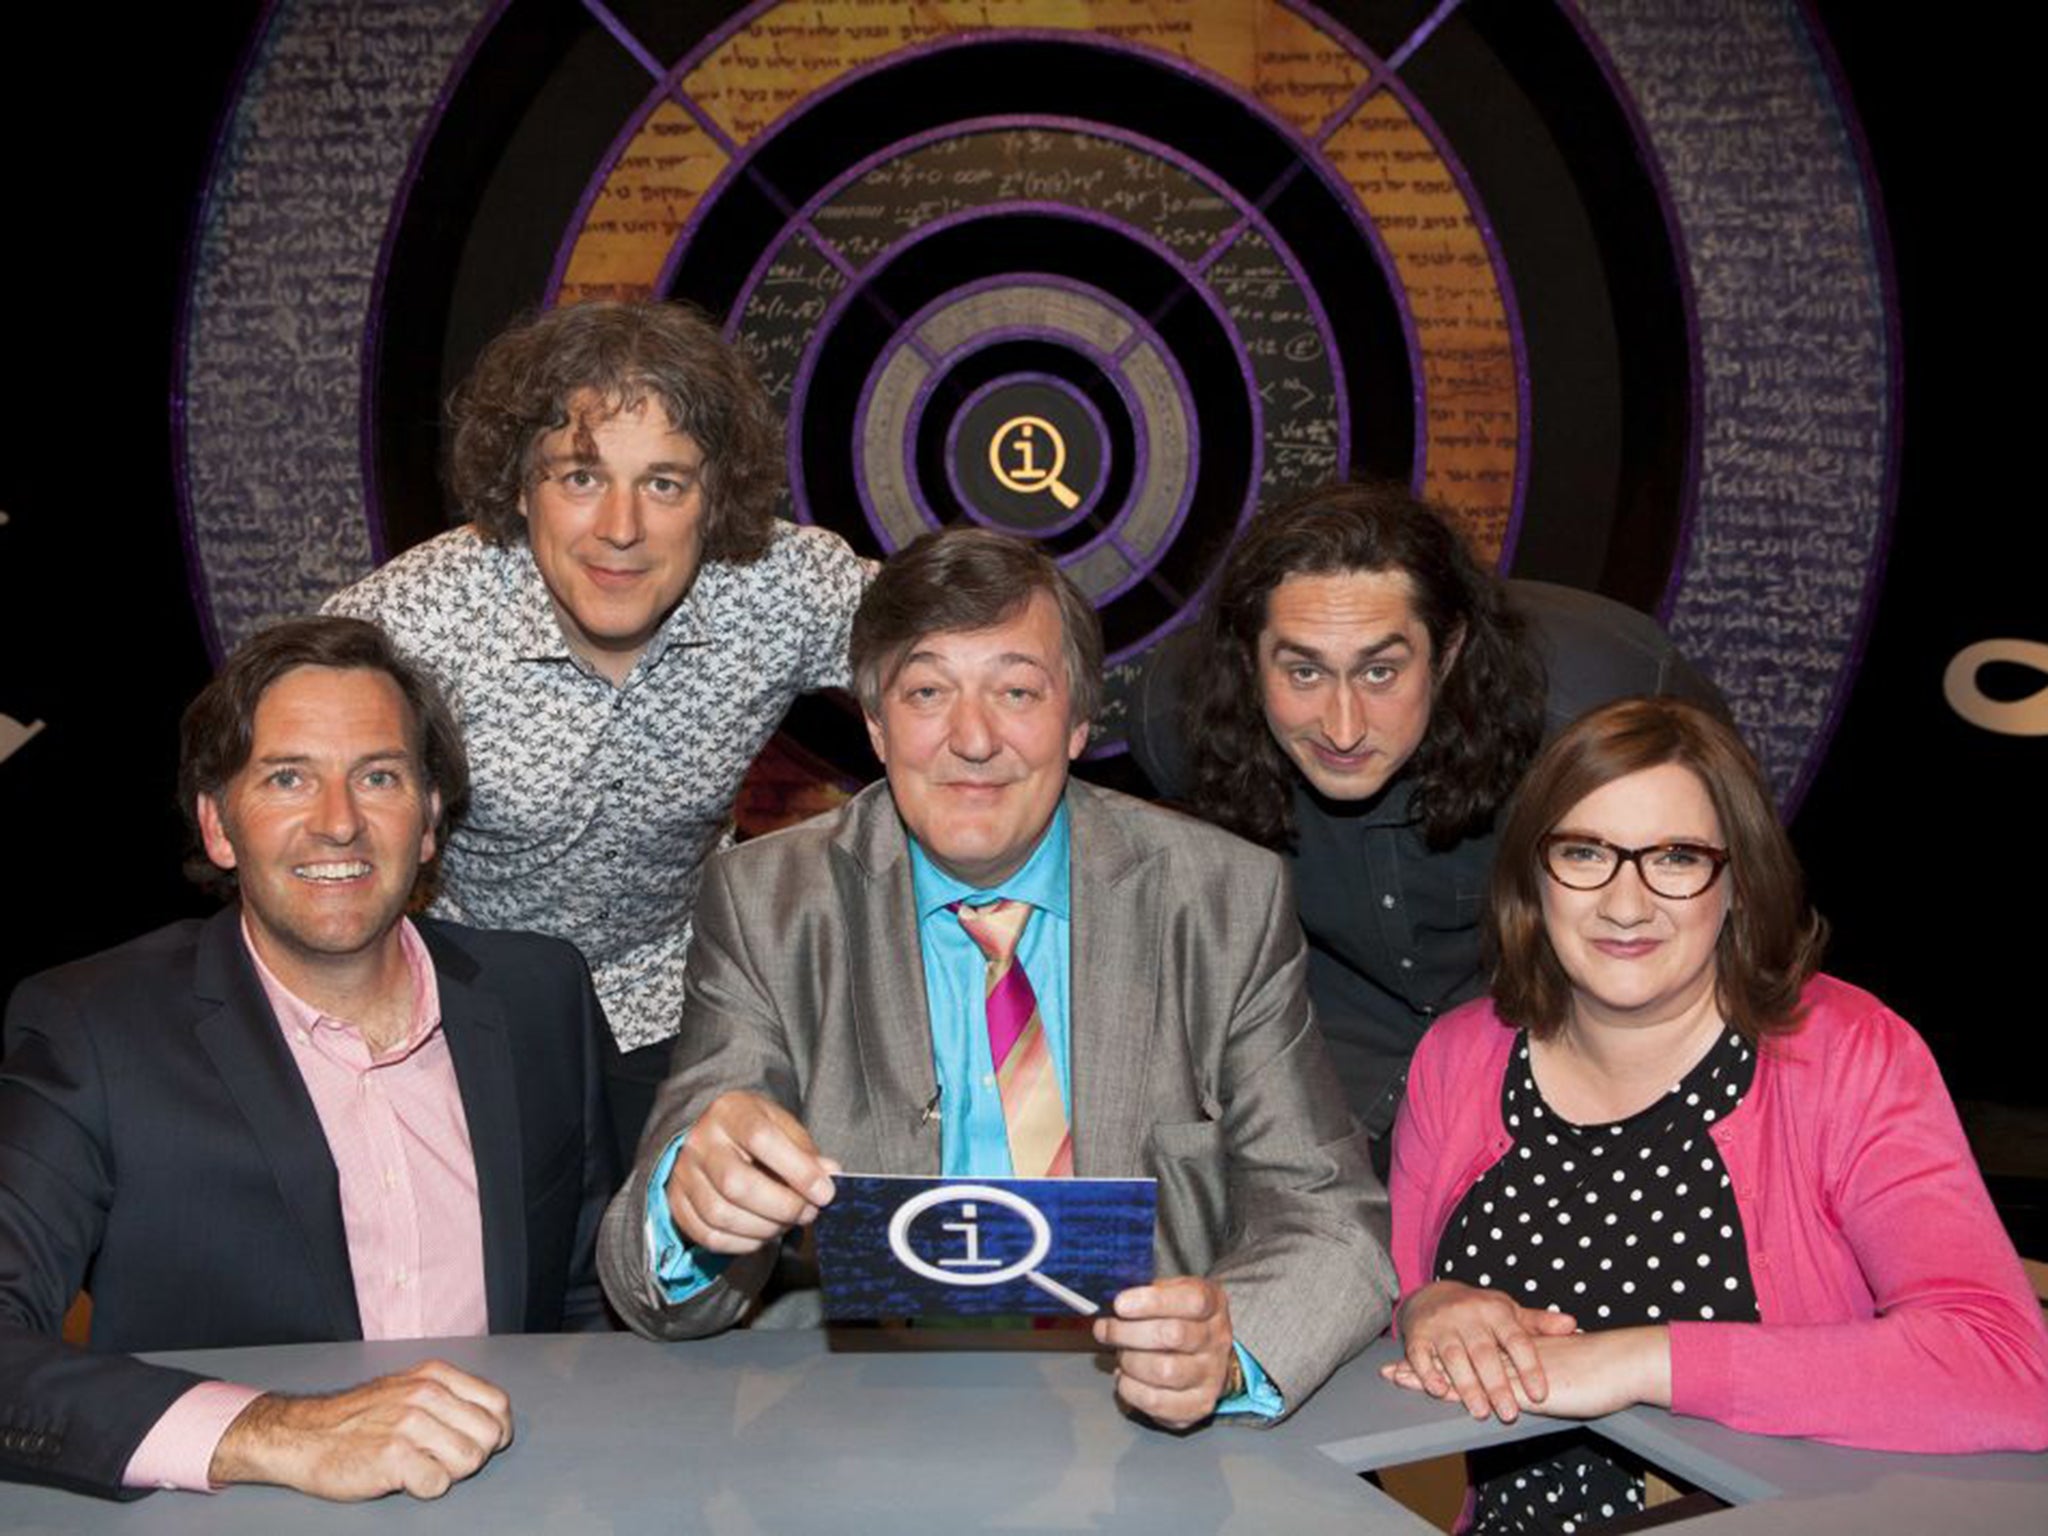 BBC's QI, which Fry hosts